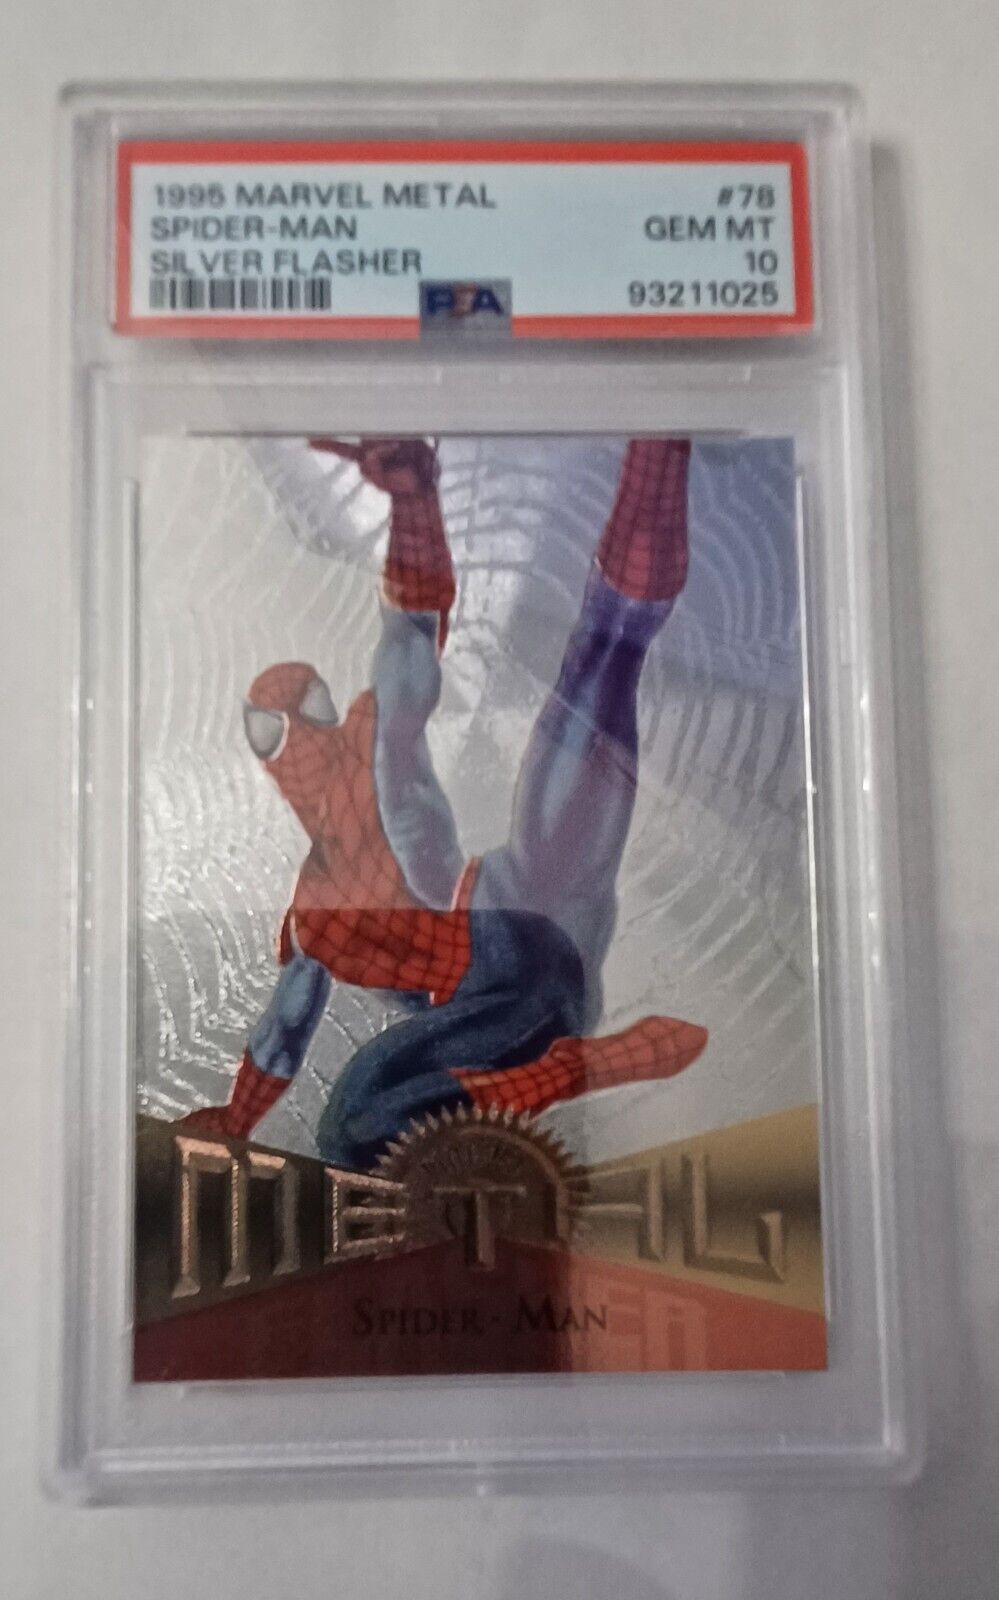 PSA 10 1995 Marvel Metal Spider-man Silver Flasher #78 - Pop of 20, Newly Graded